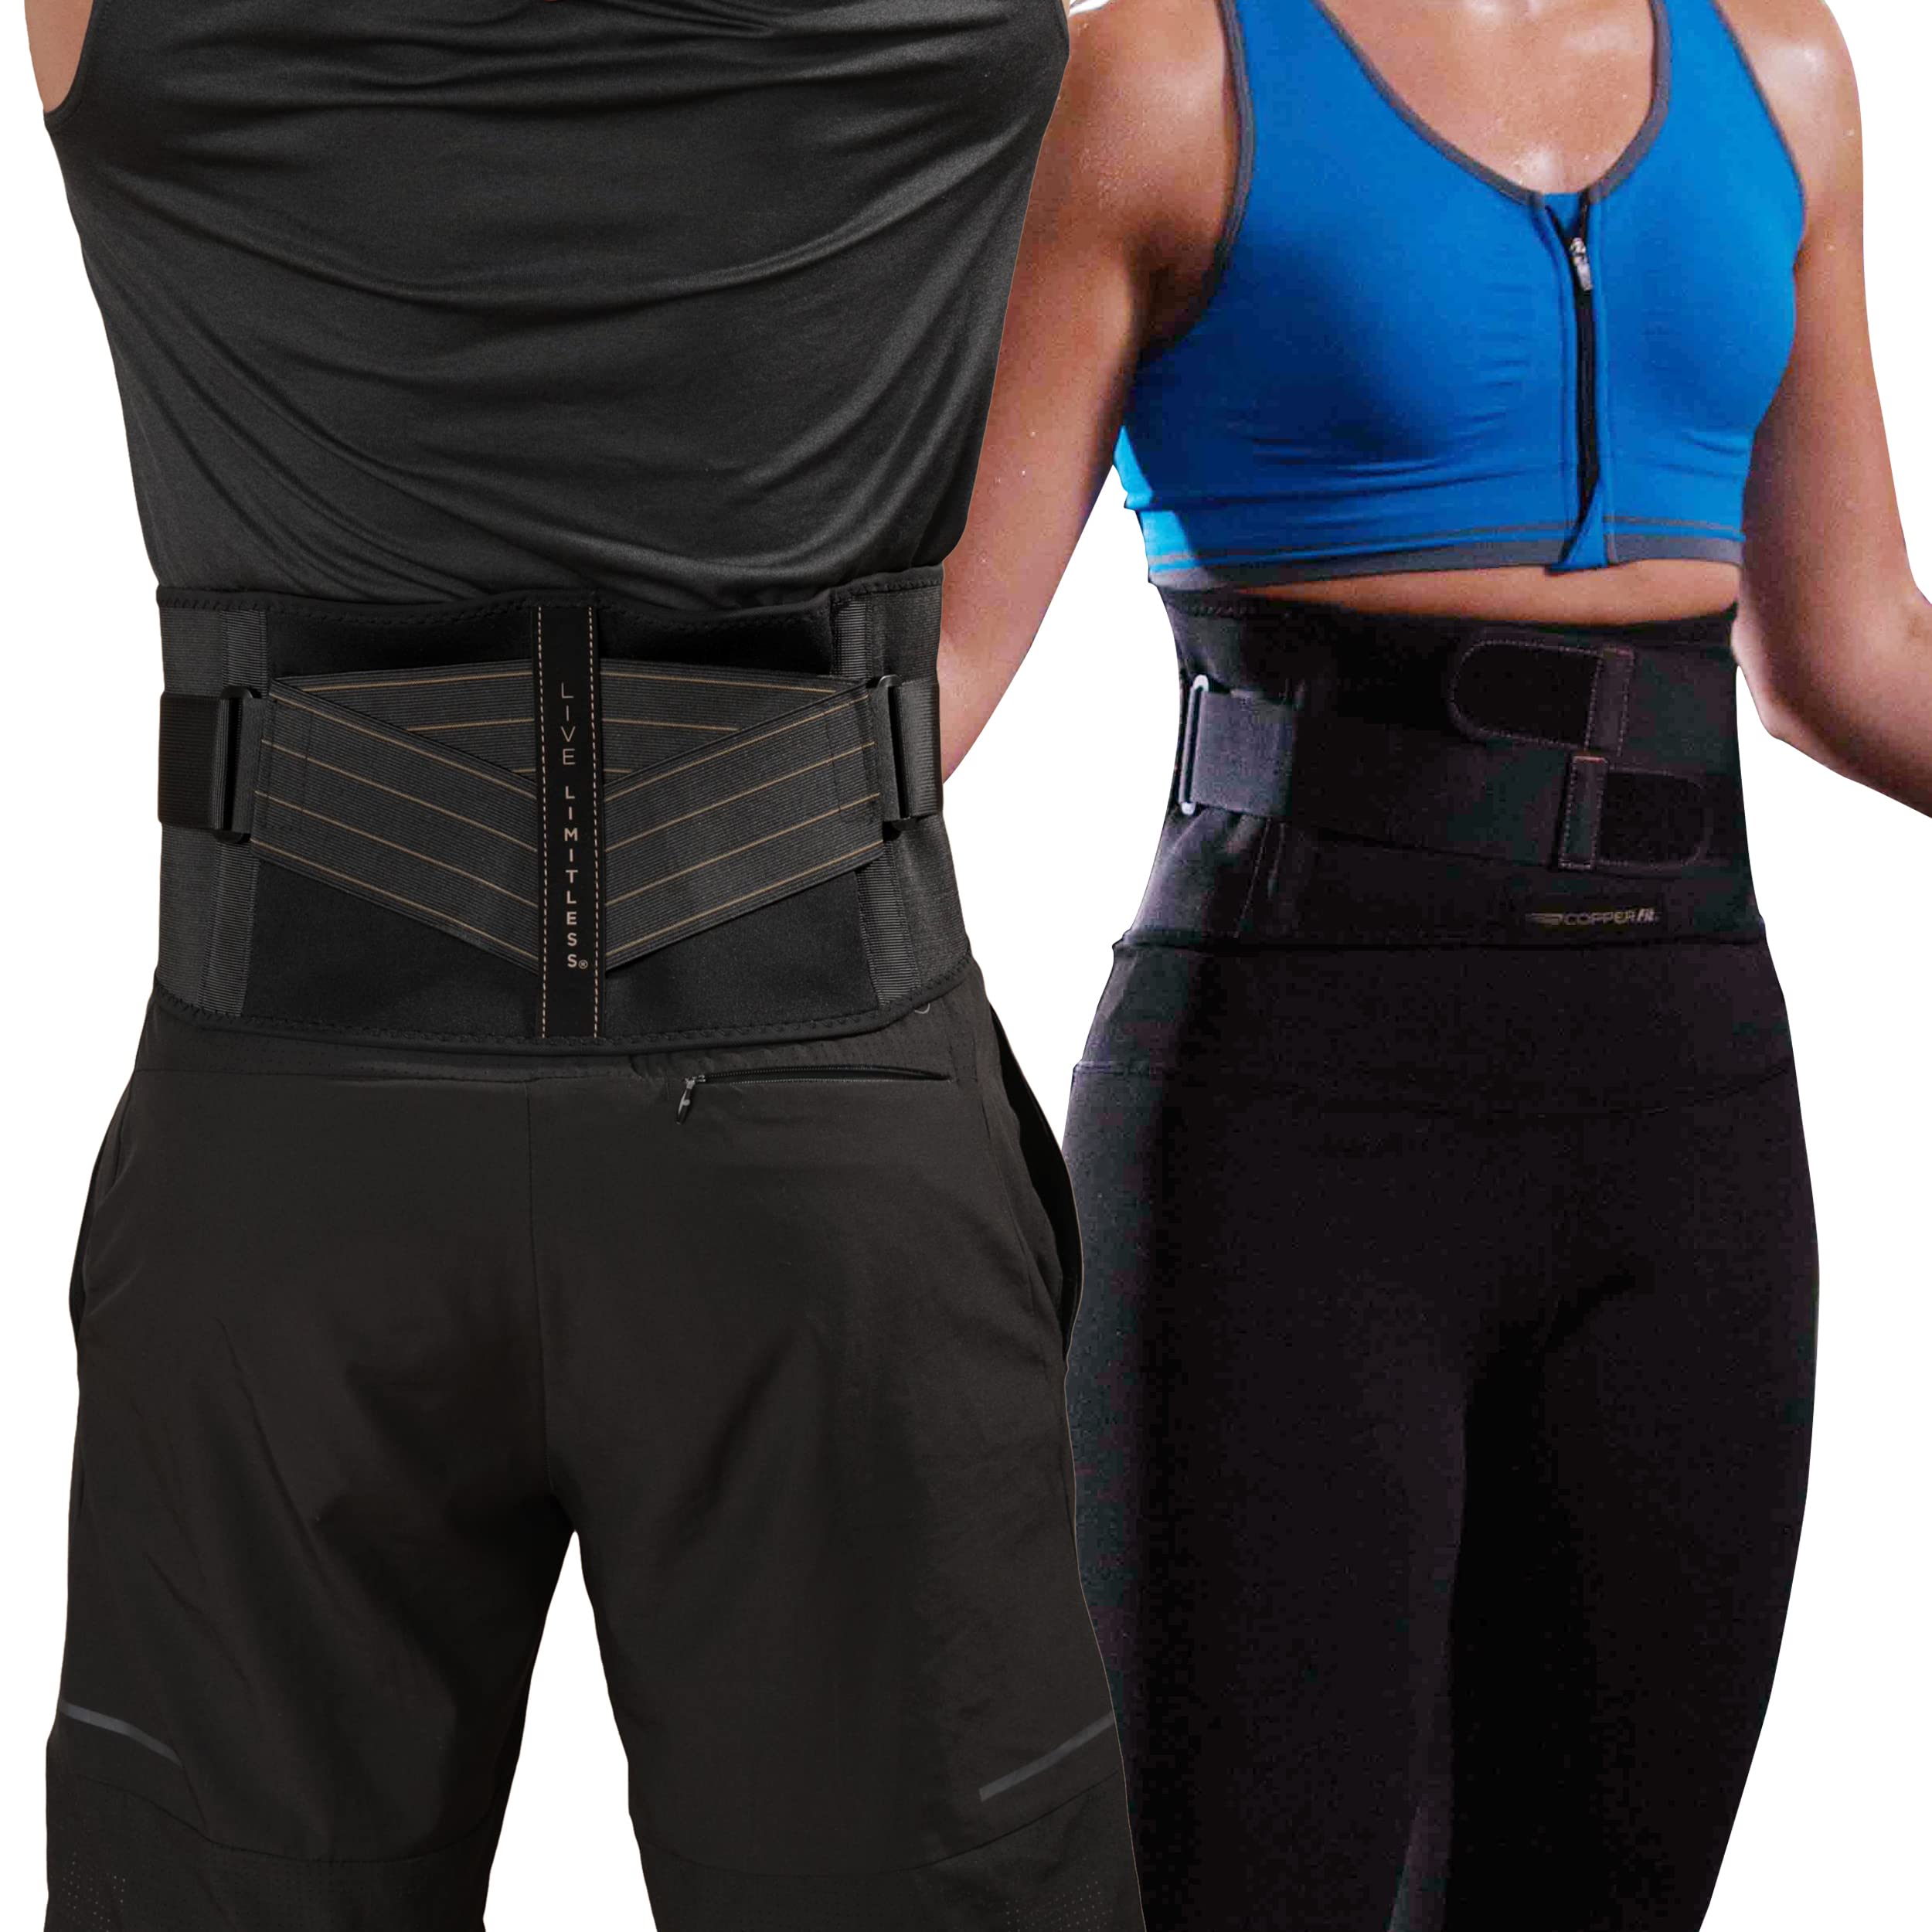 Copper Fit Unisex Adult Rapid Relief Back Support Brace with Hot/Cold  Therapy Base Layer, Black, Adjustable